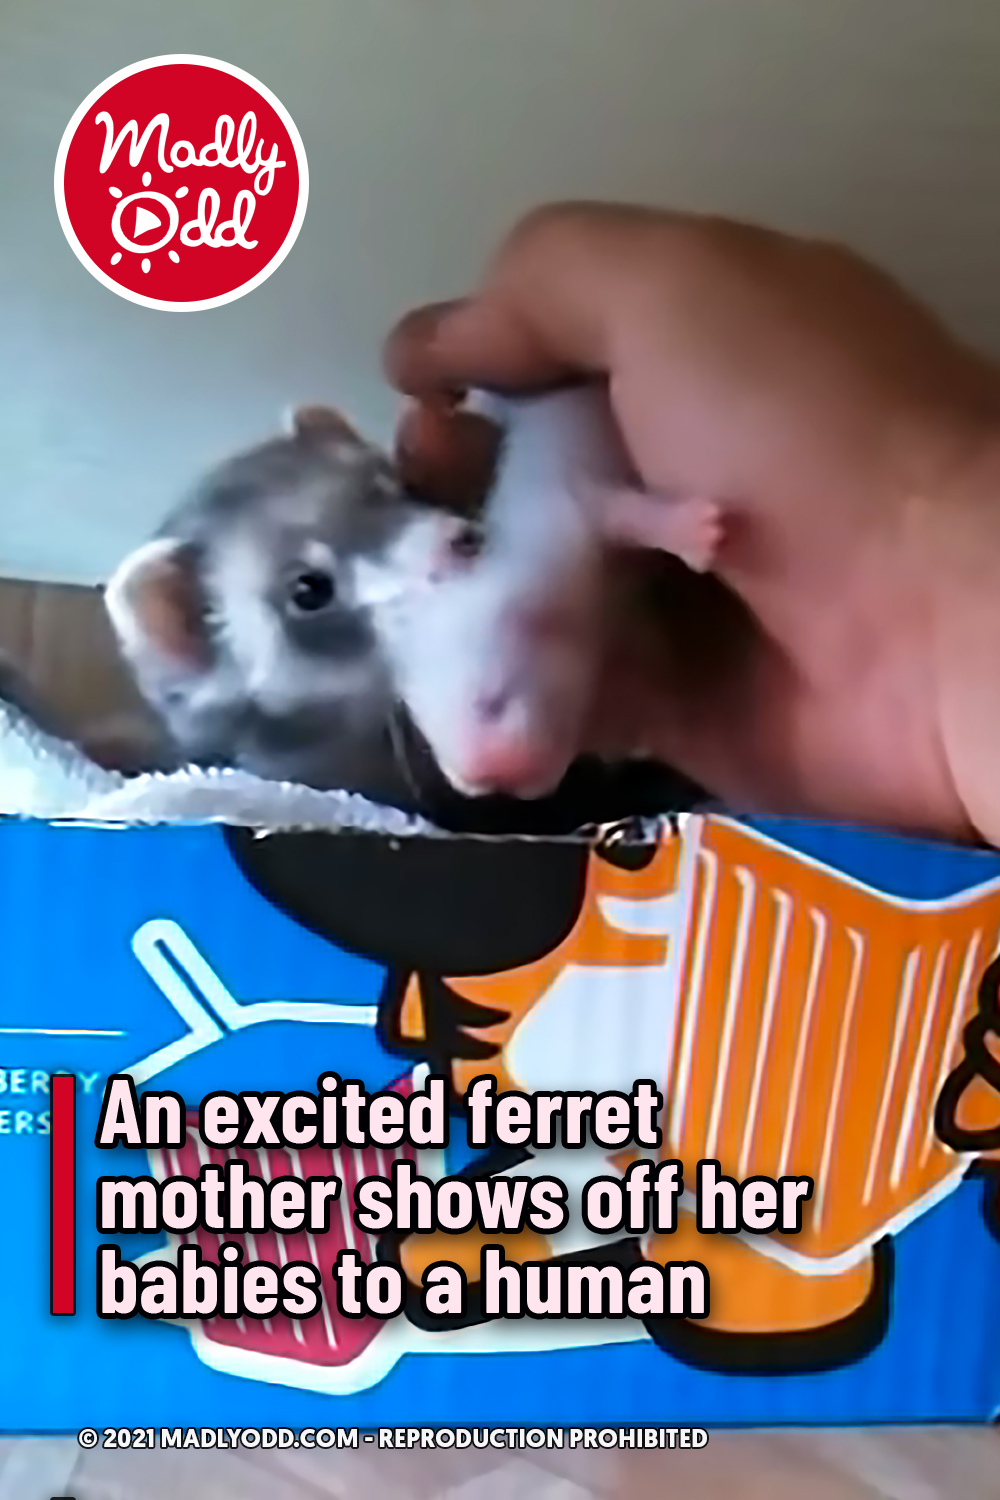 An excited ferret mother shows off her babies to a human